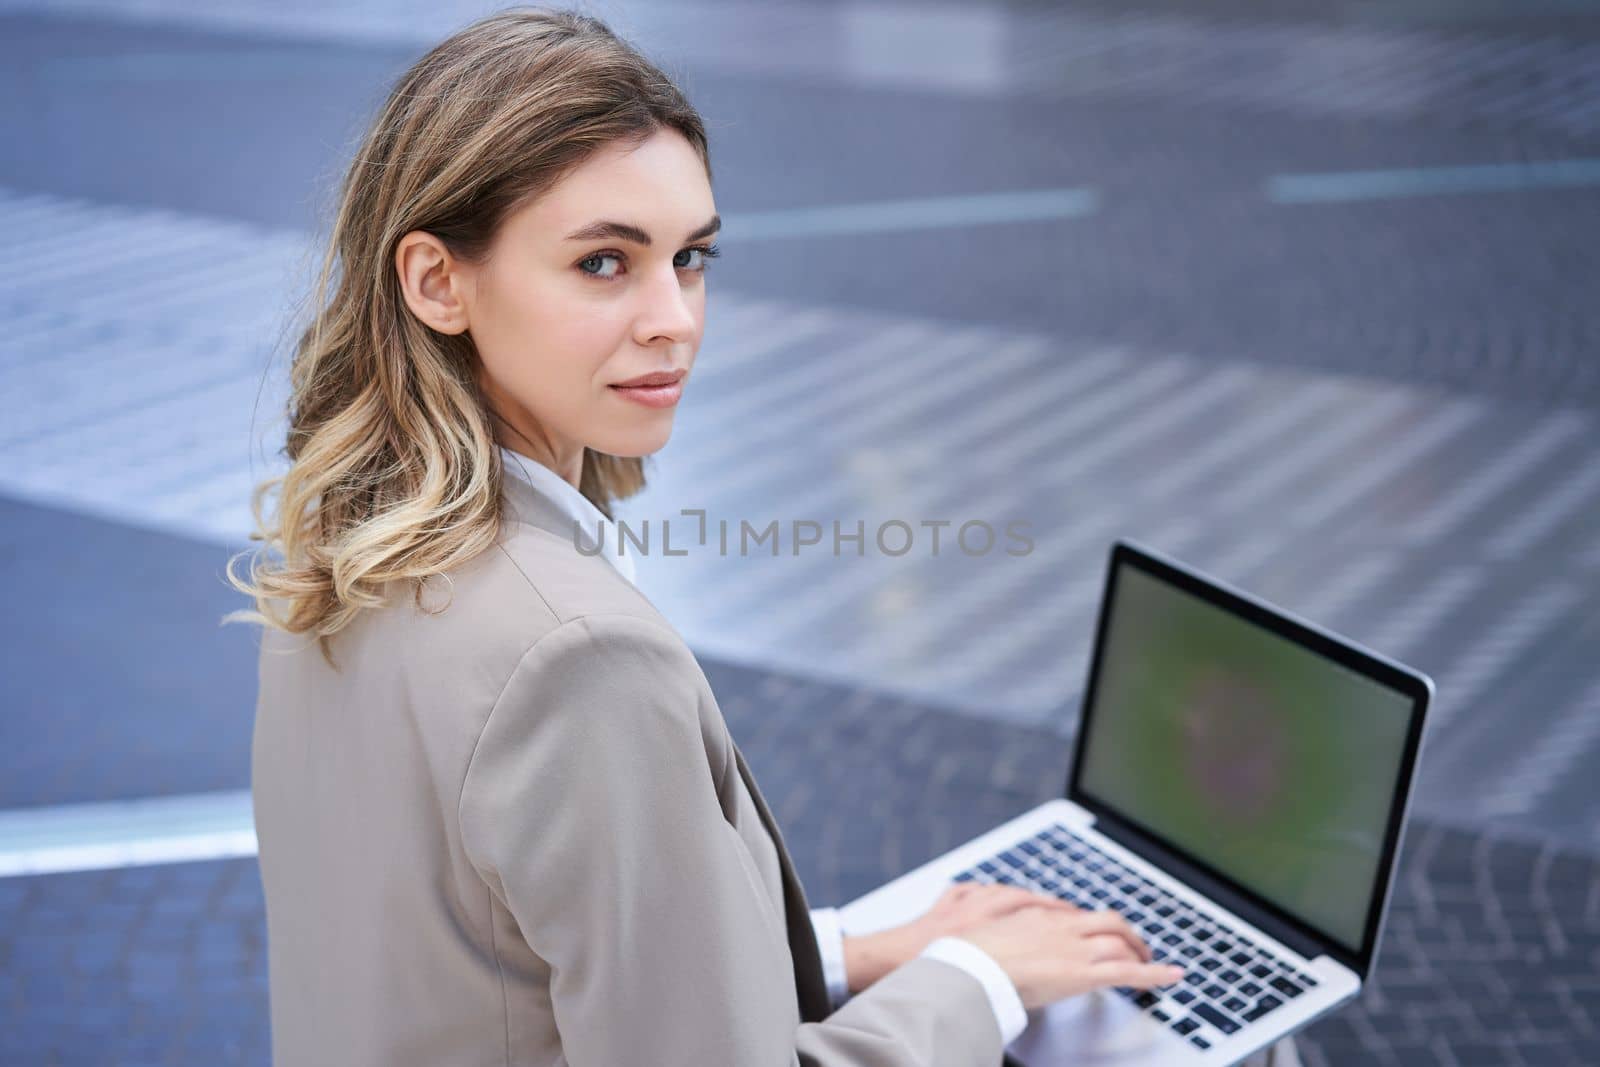 Young businesswoman using laptop while sitting outdoors in city centre, typing on keyboard. Girl preparing for interview, wearing suit.